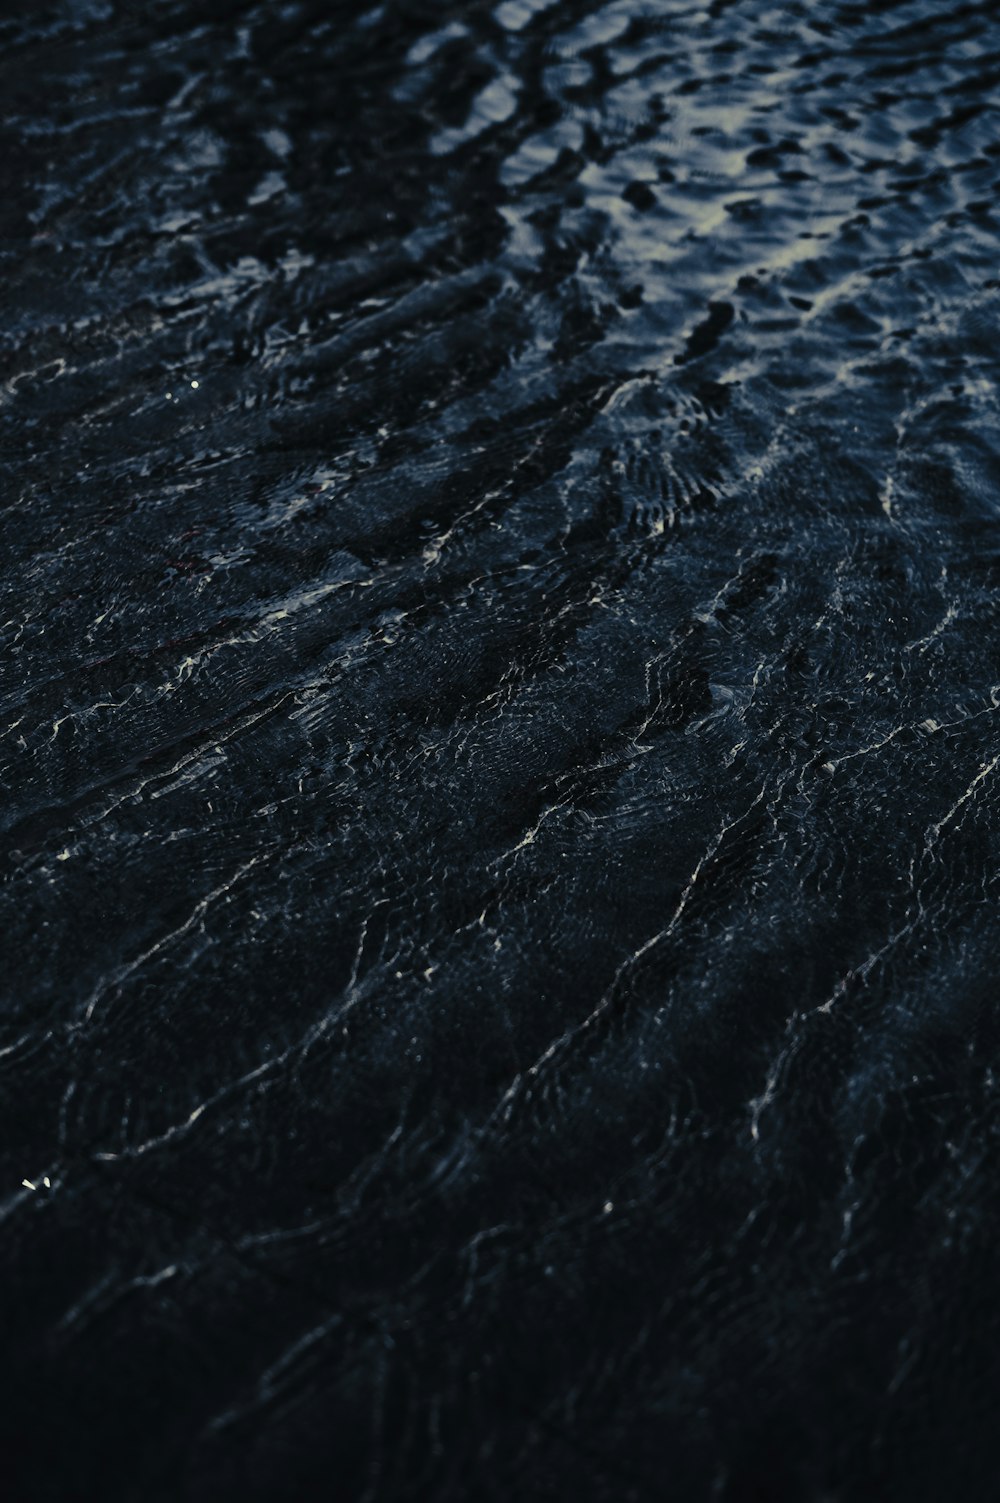 a close-up of a wave